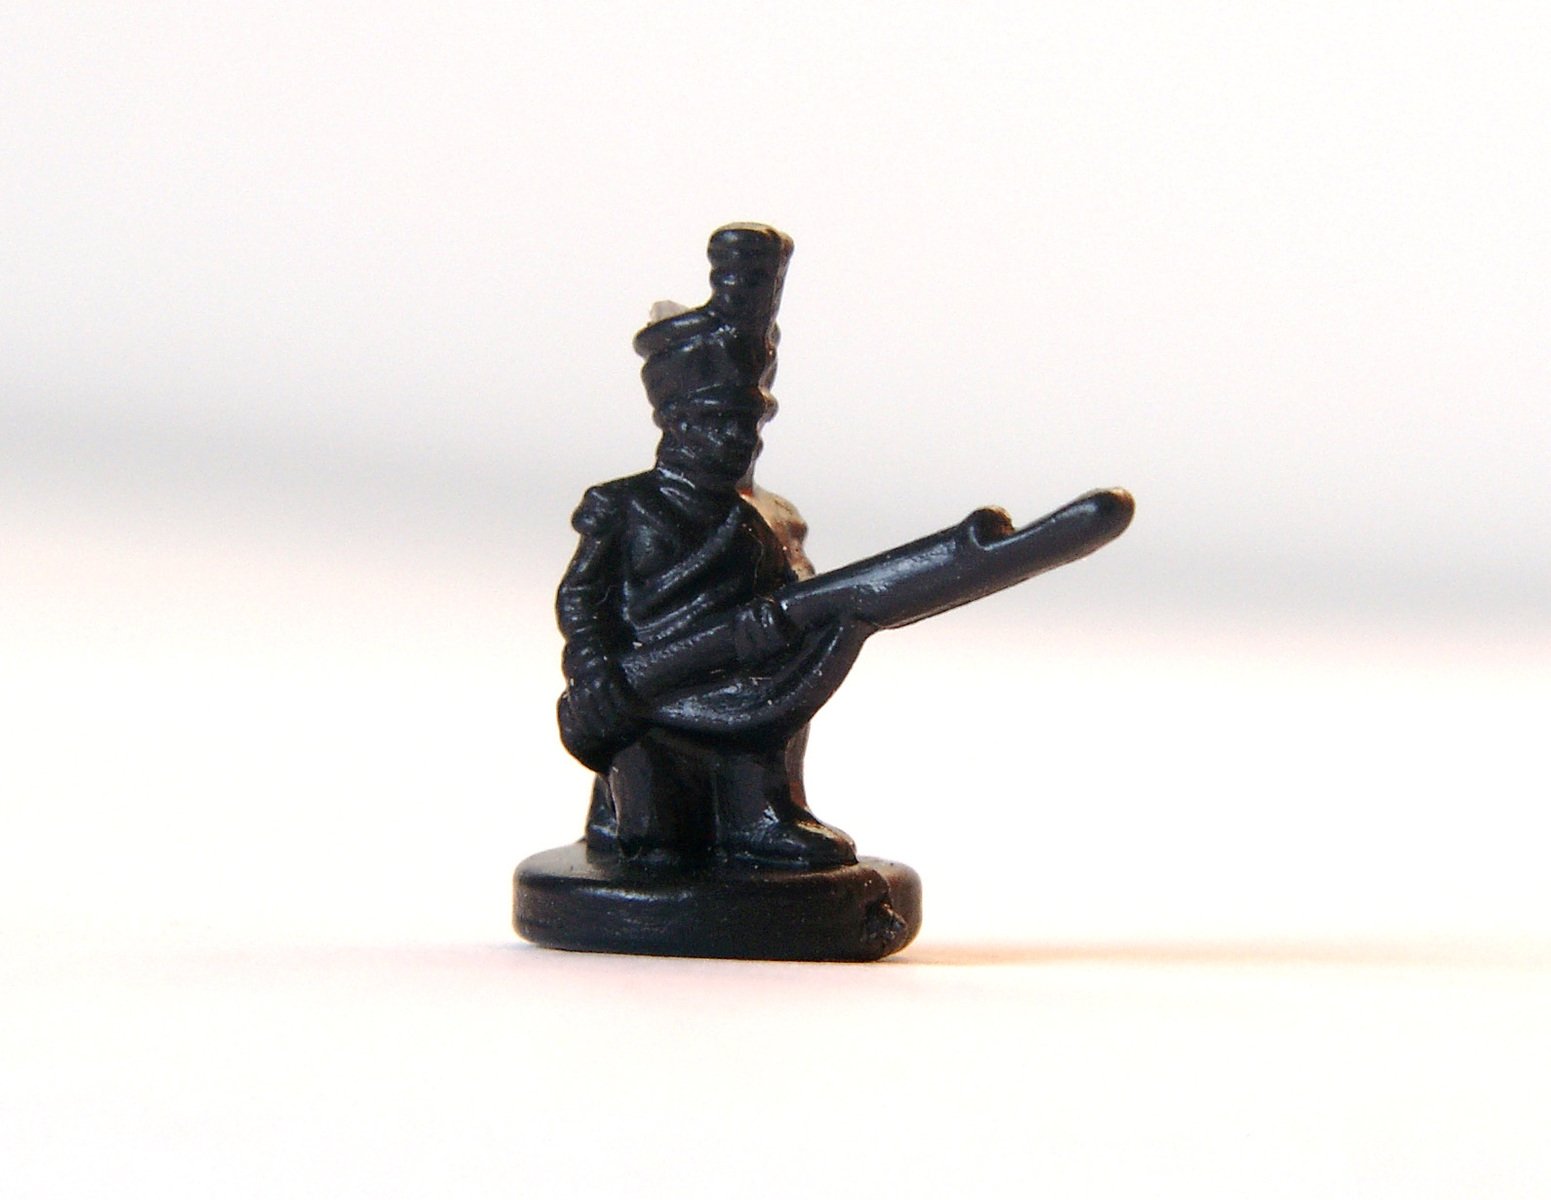 a toy figurine of a man with a pipe